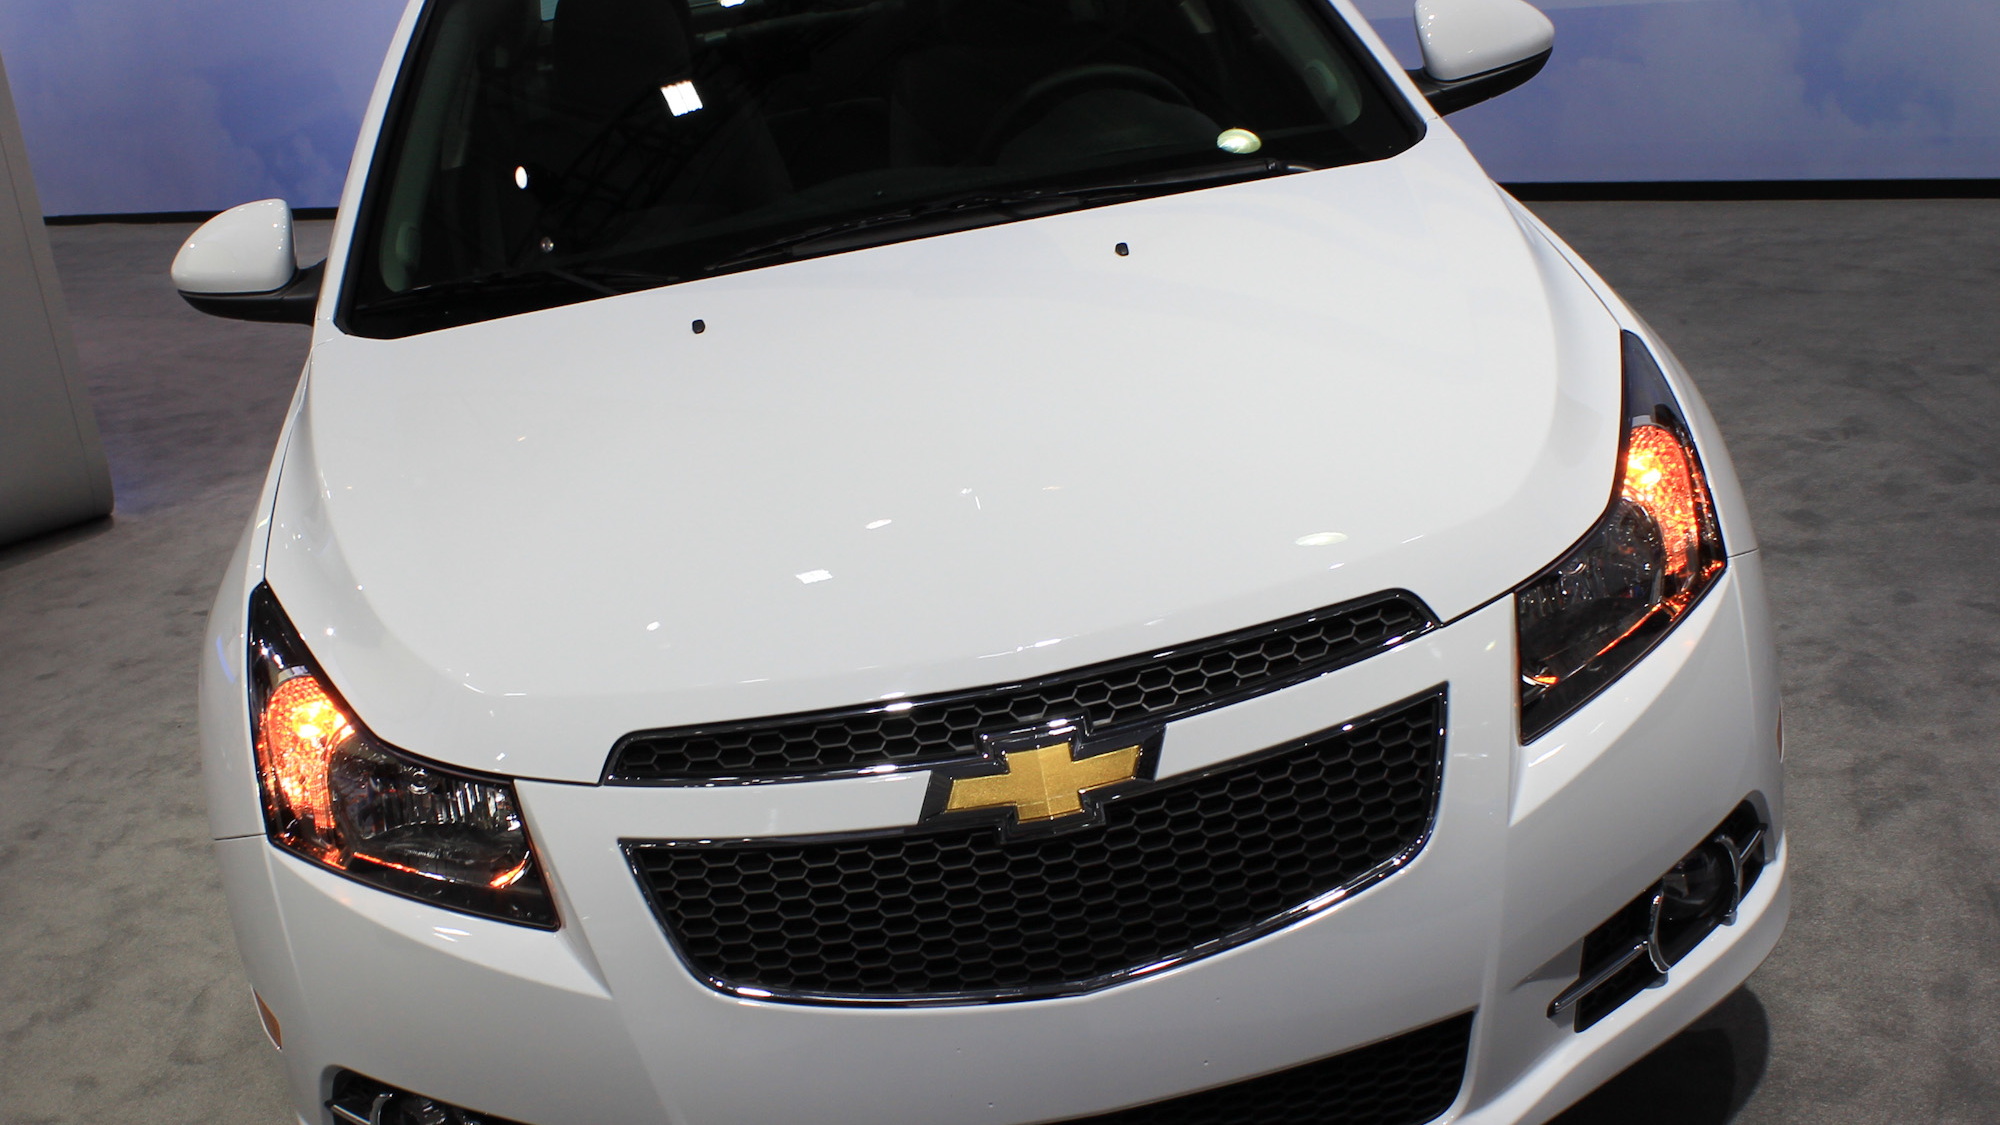 2015 Chevy Cruze Gets New Styling And Tech: 2014 New York Auto ...